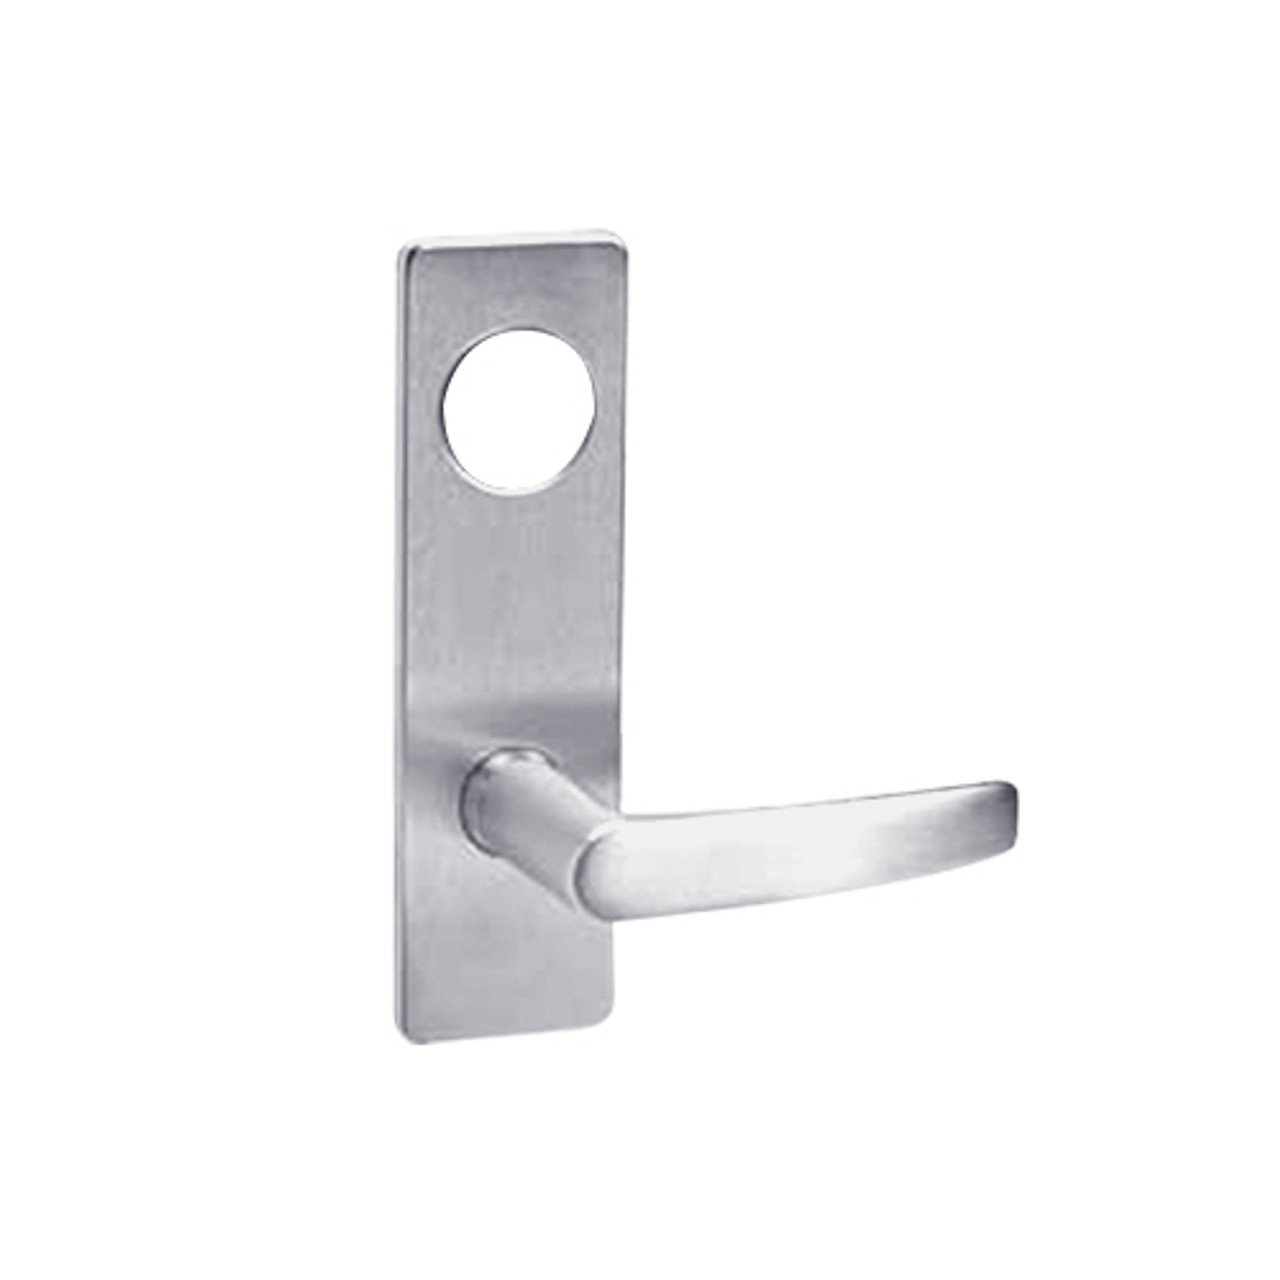 ML2065-ASN-626-LC Corbin Russwin ML2000 Series Mortise Dormitory Locksets with Armstrong Lever in Satin Chrome